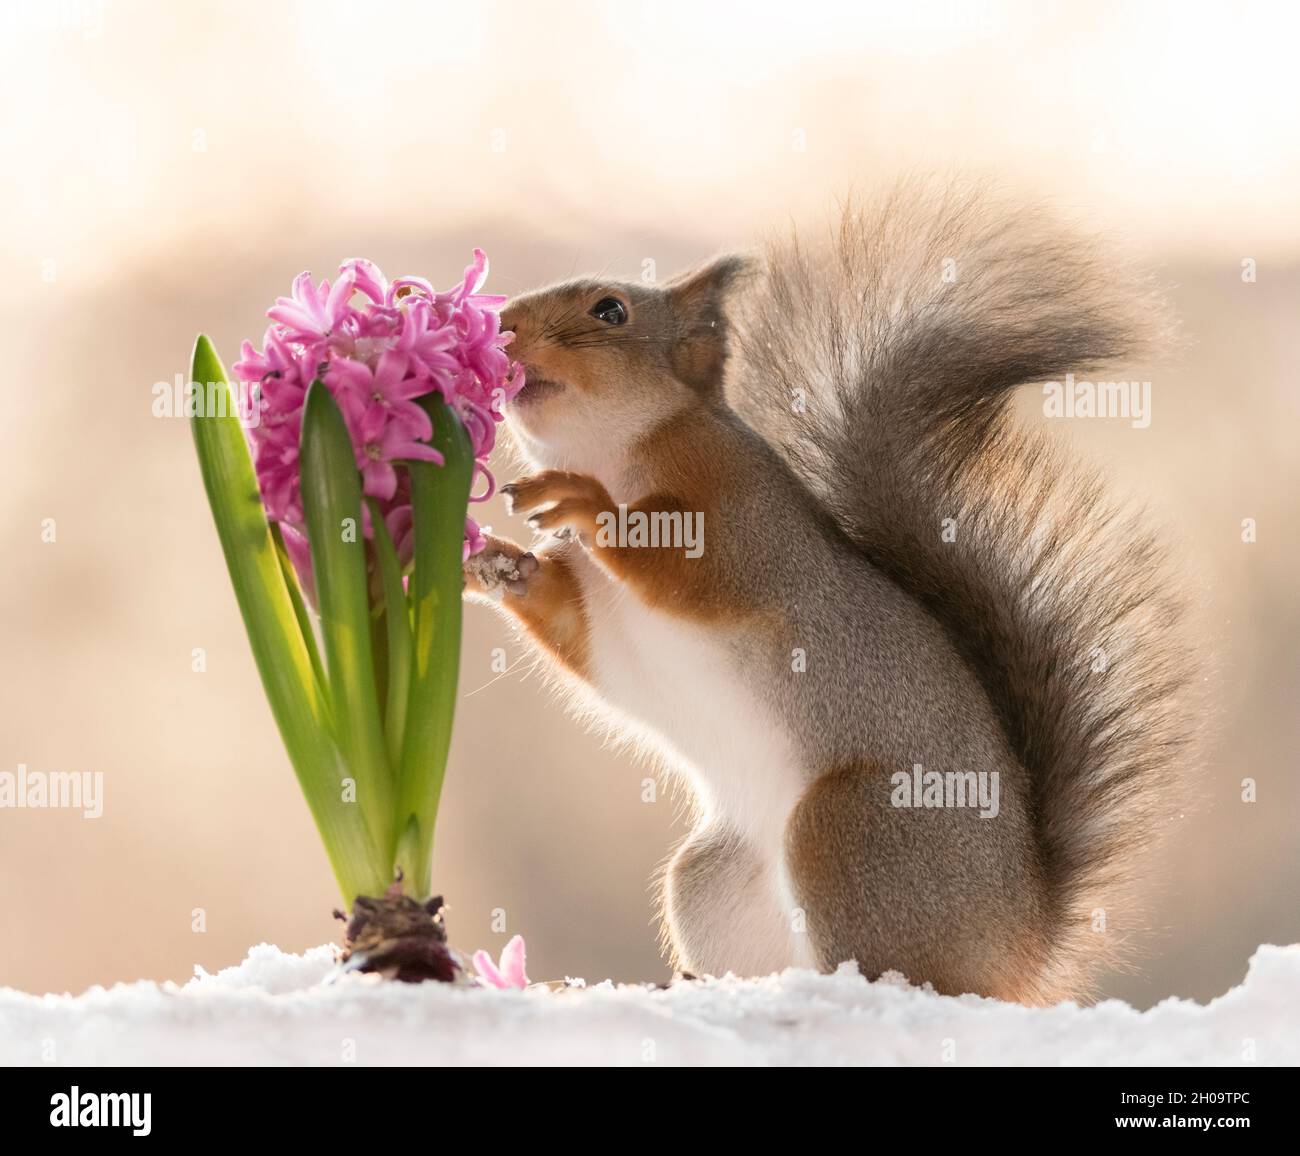 red squirrel is smelling a Hyacinthus in the snow Stock Photo